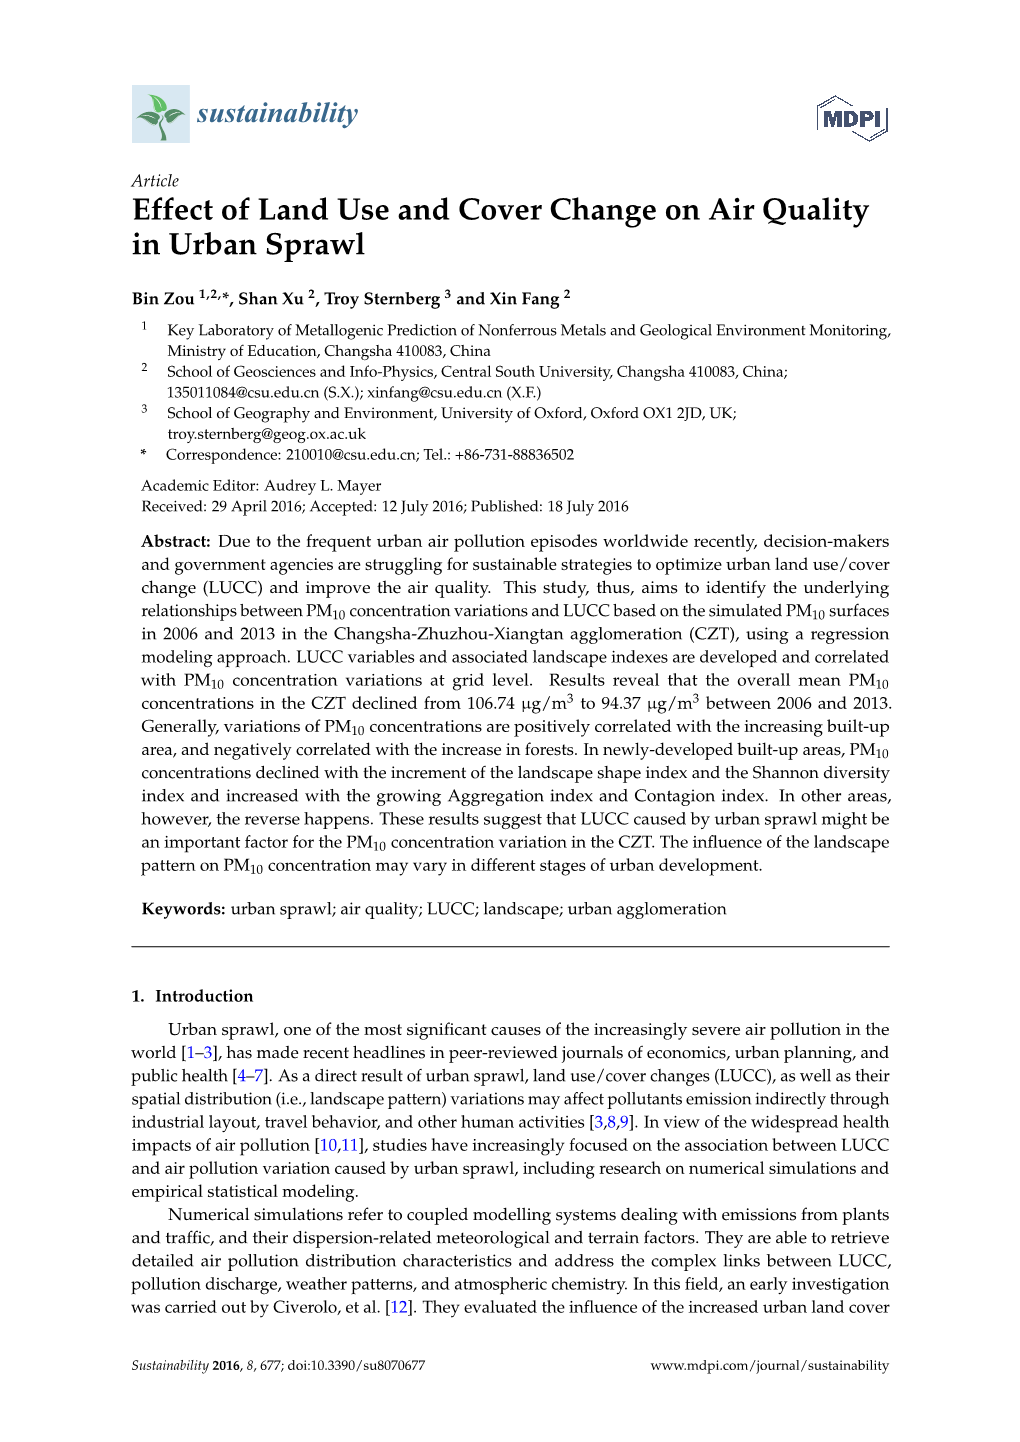 Effect of Land Use and Cover Change on Air Quality in Urban Sprawl